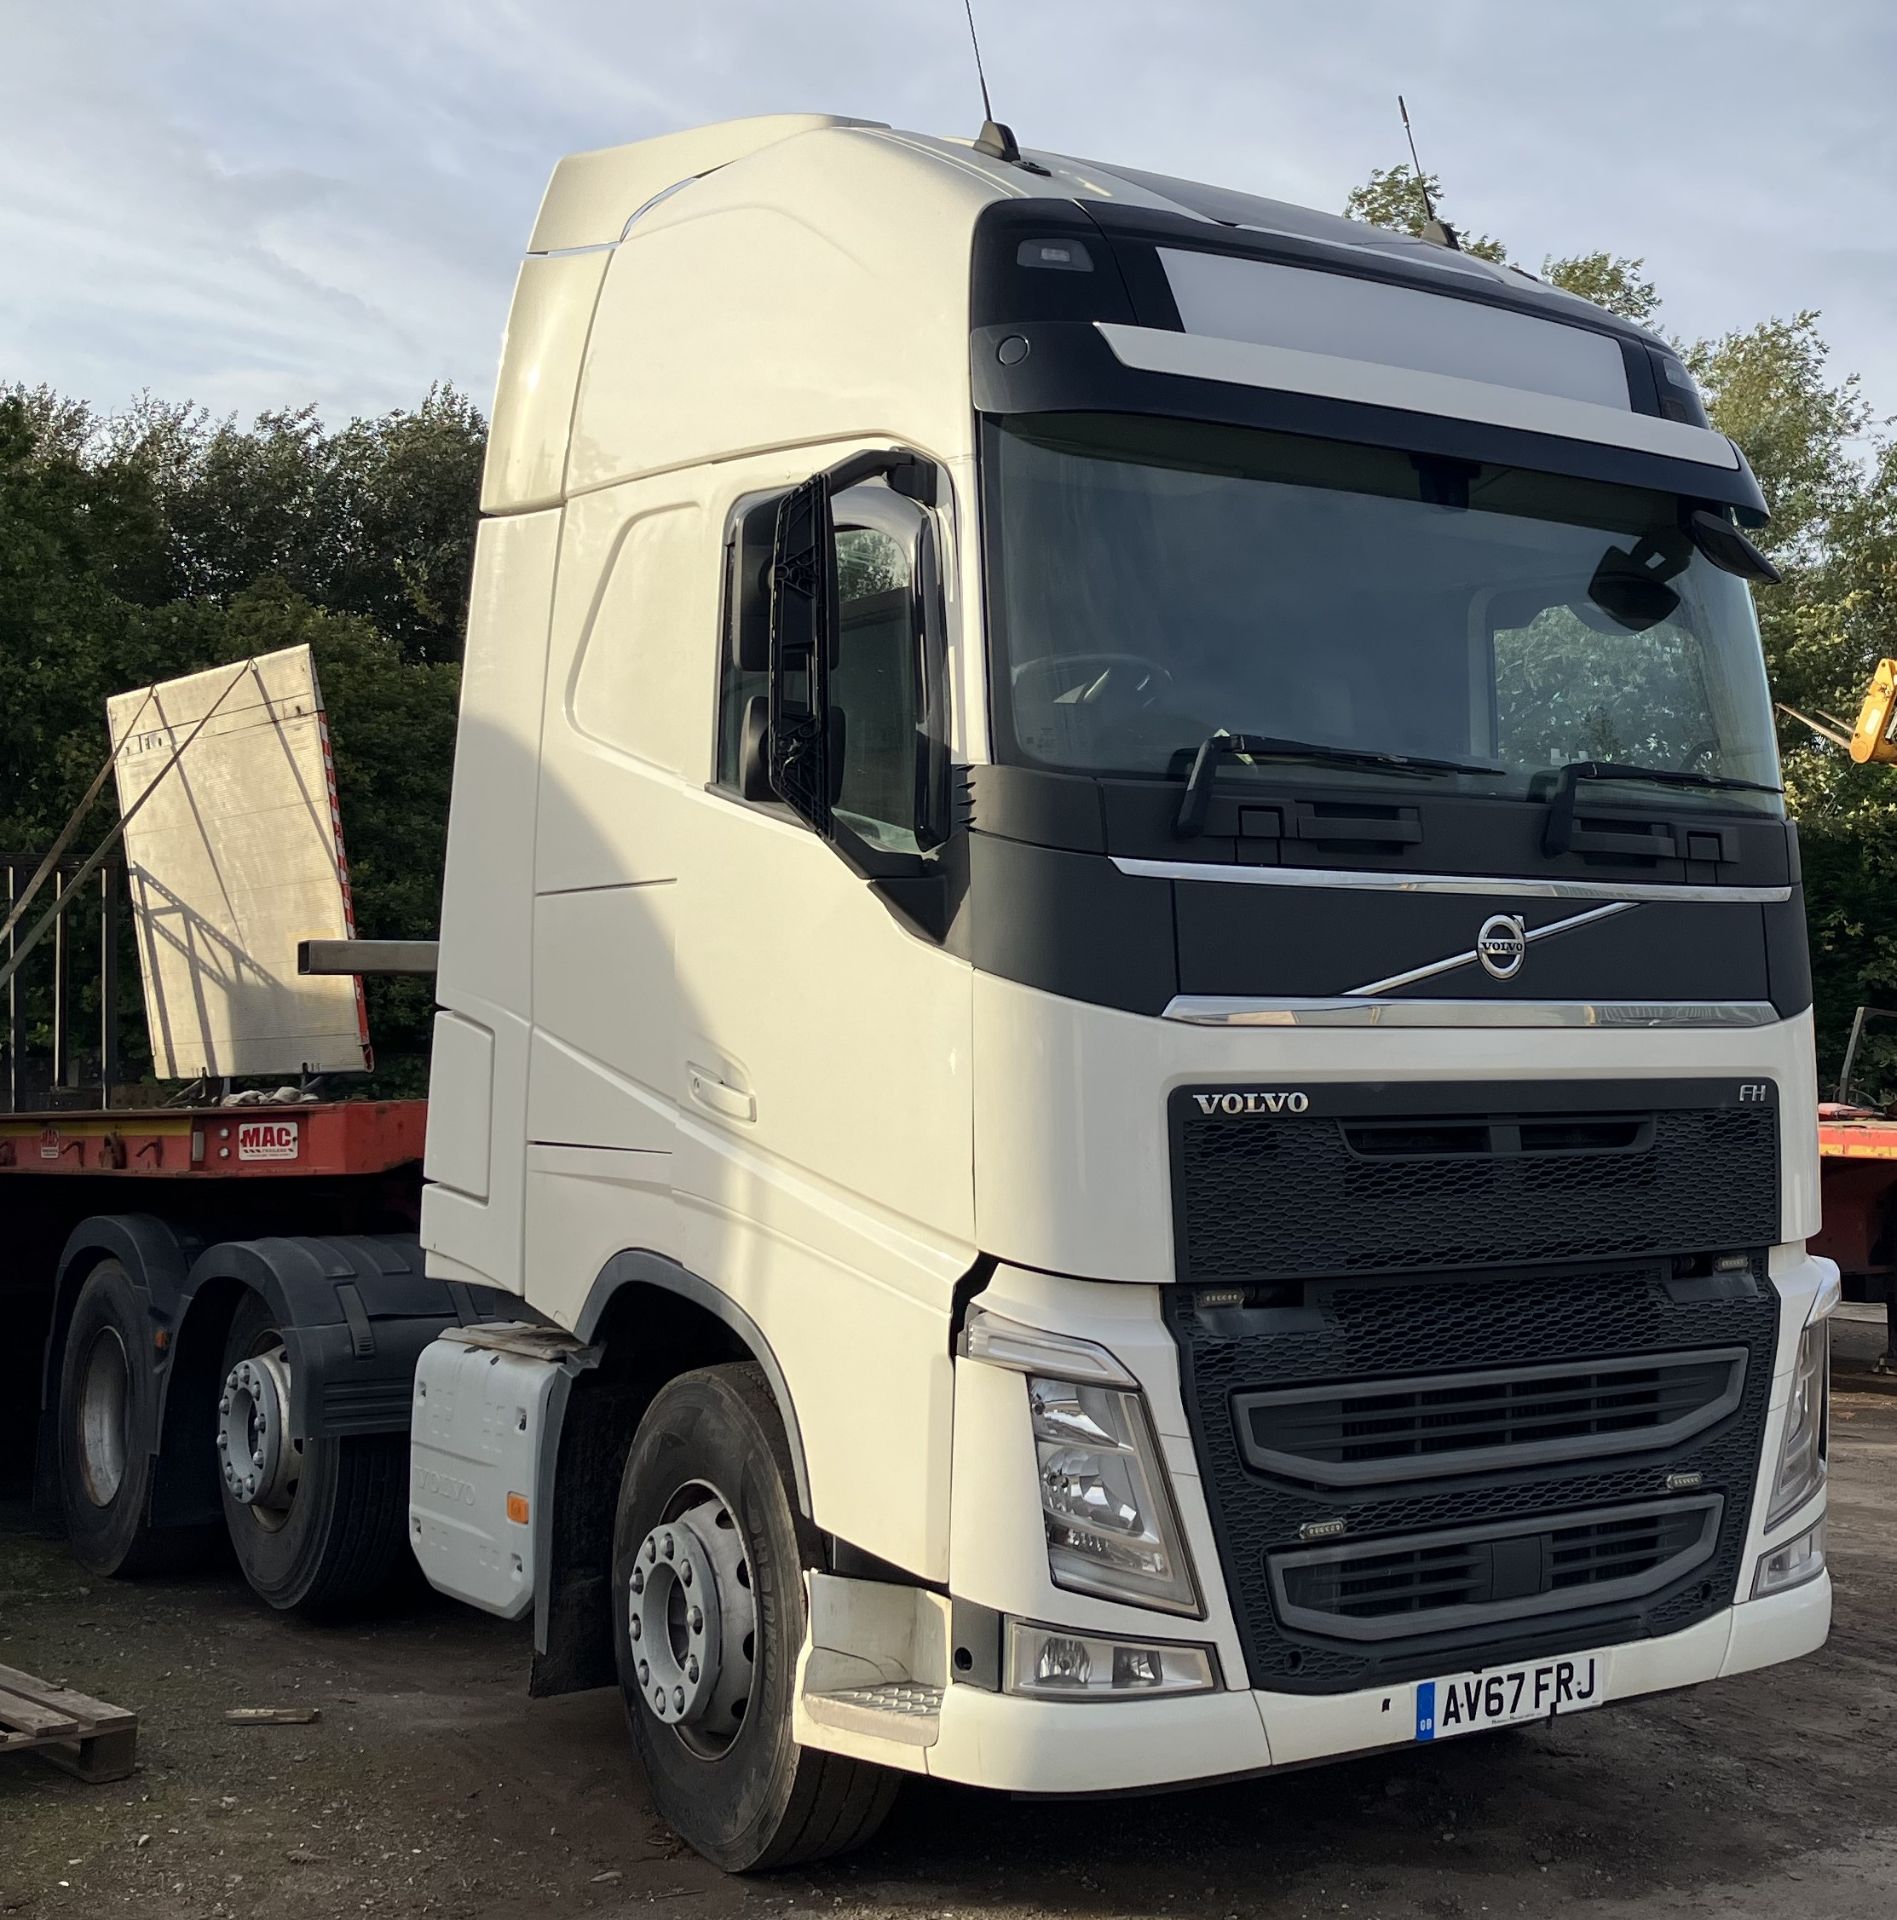 2018 ('67') Volvo FH540 6x2 Tractor Unit with Globetrotter XL Cab